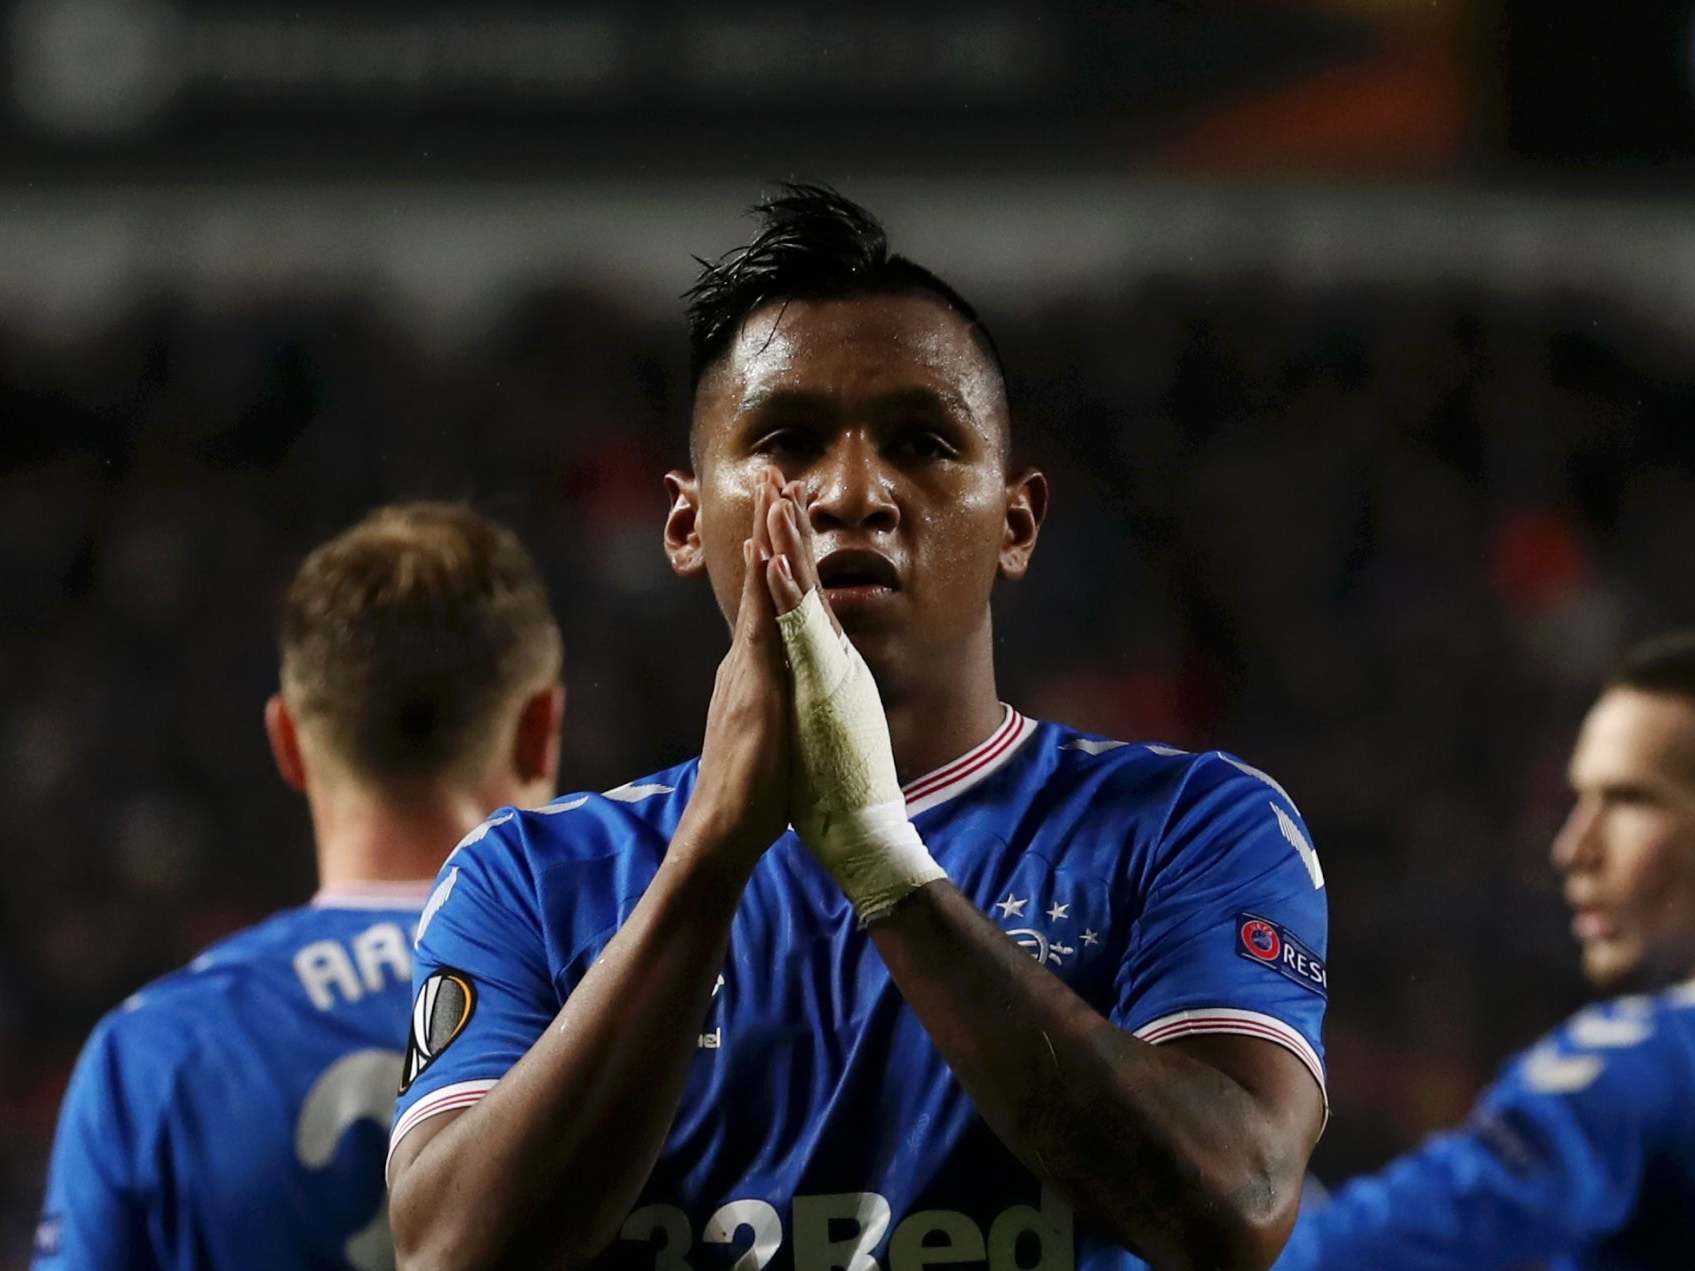 Alfredo Morelos has received an apology from Sky Sports